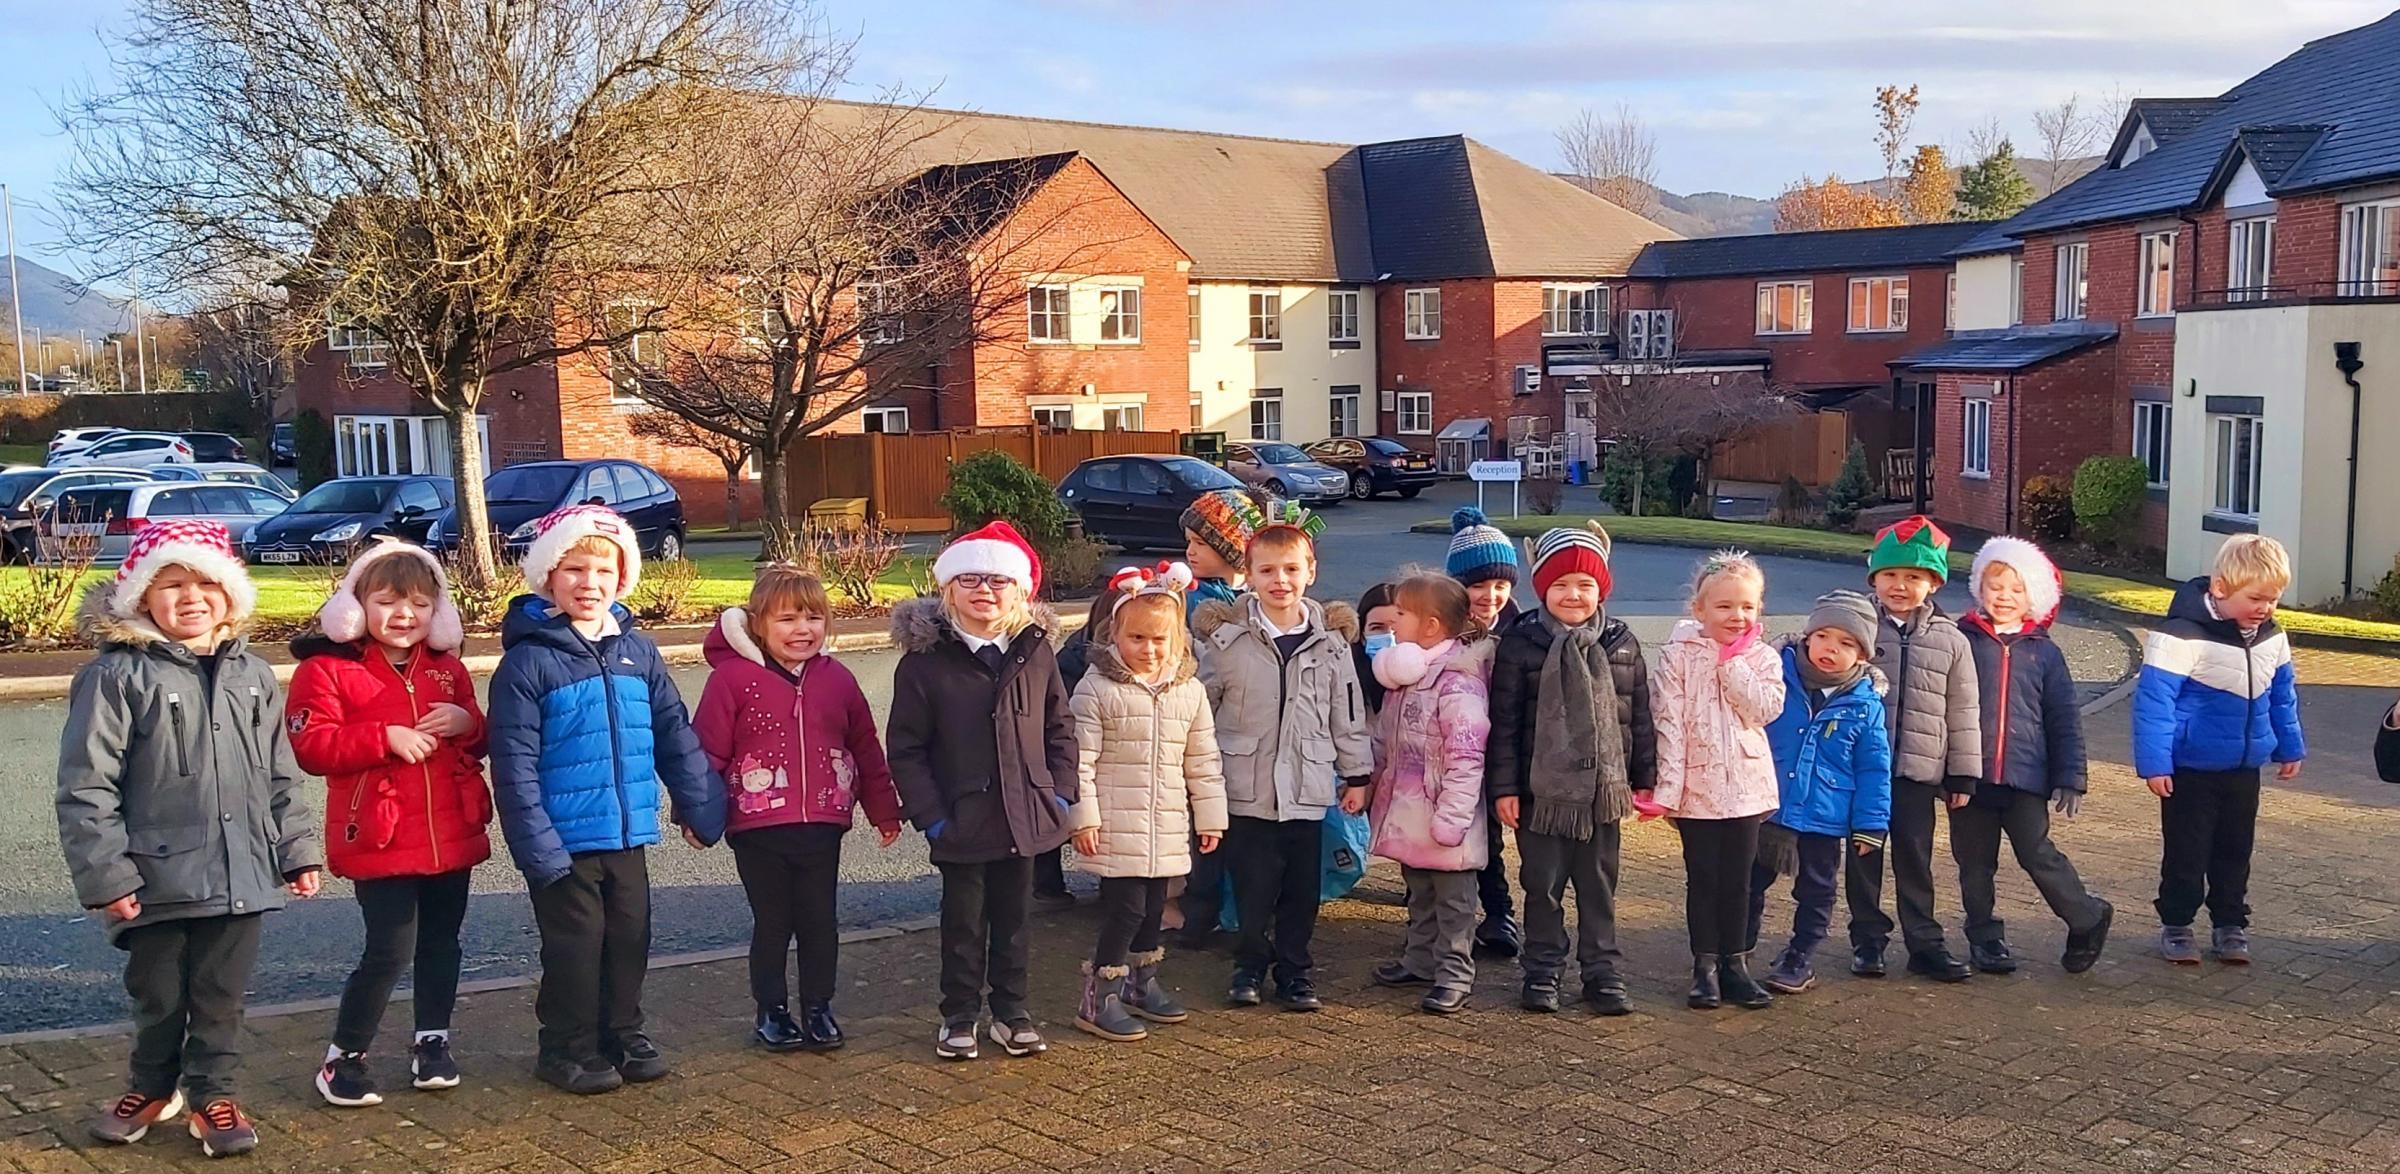 Welshpool Church in Wales Primary School sang Christmas carols to residents at The Rhallt care home.